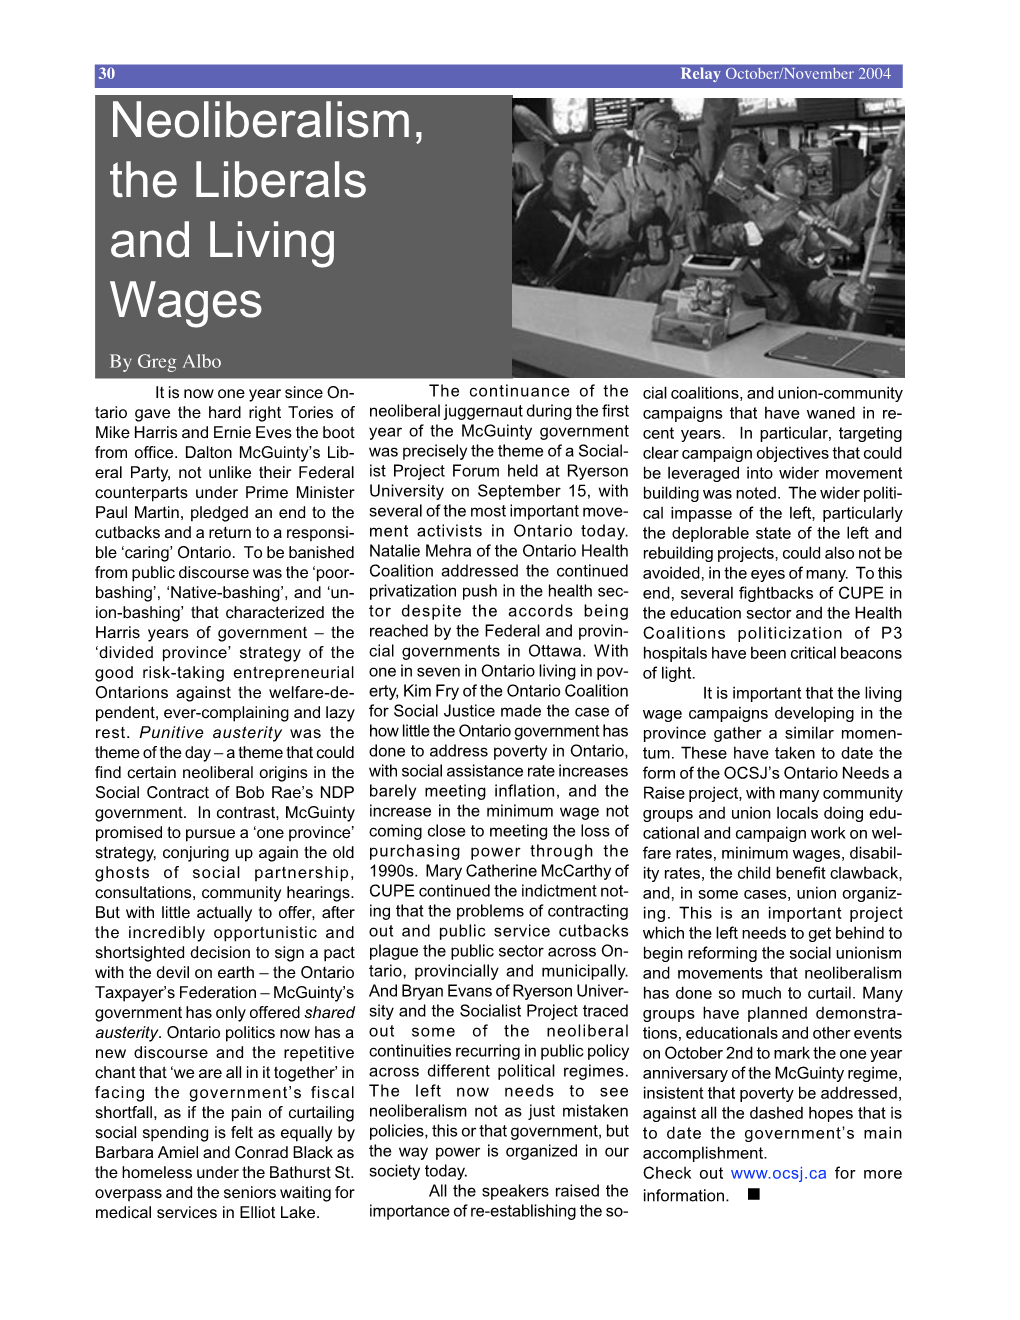 Neoliberalism, the Liberals, and Living Wages